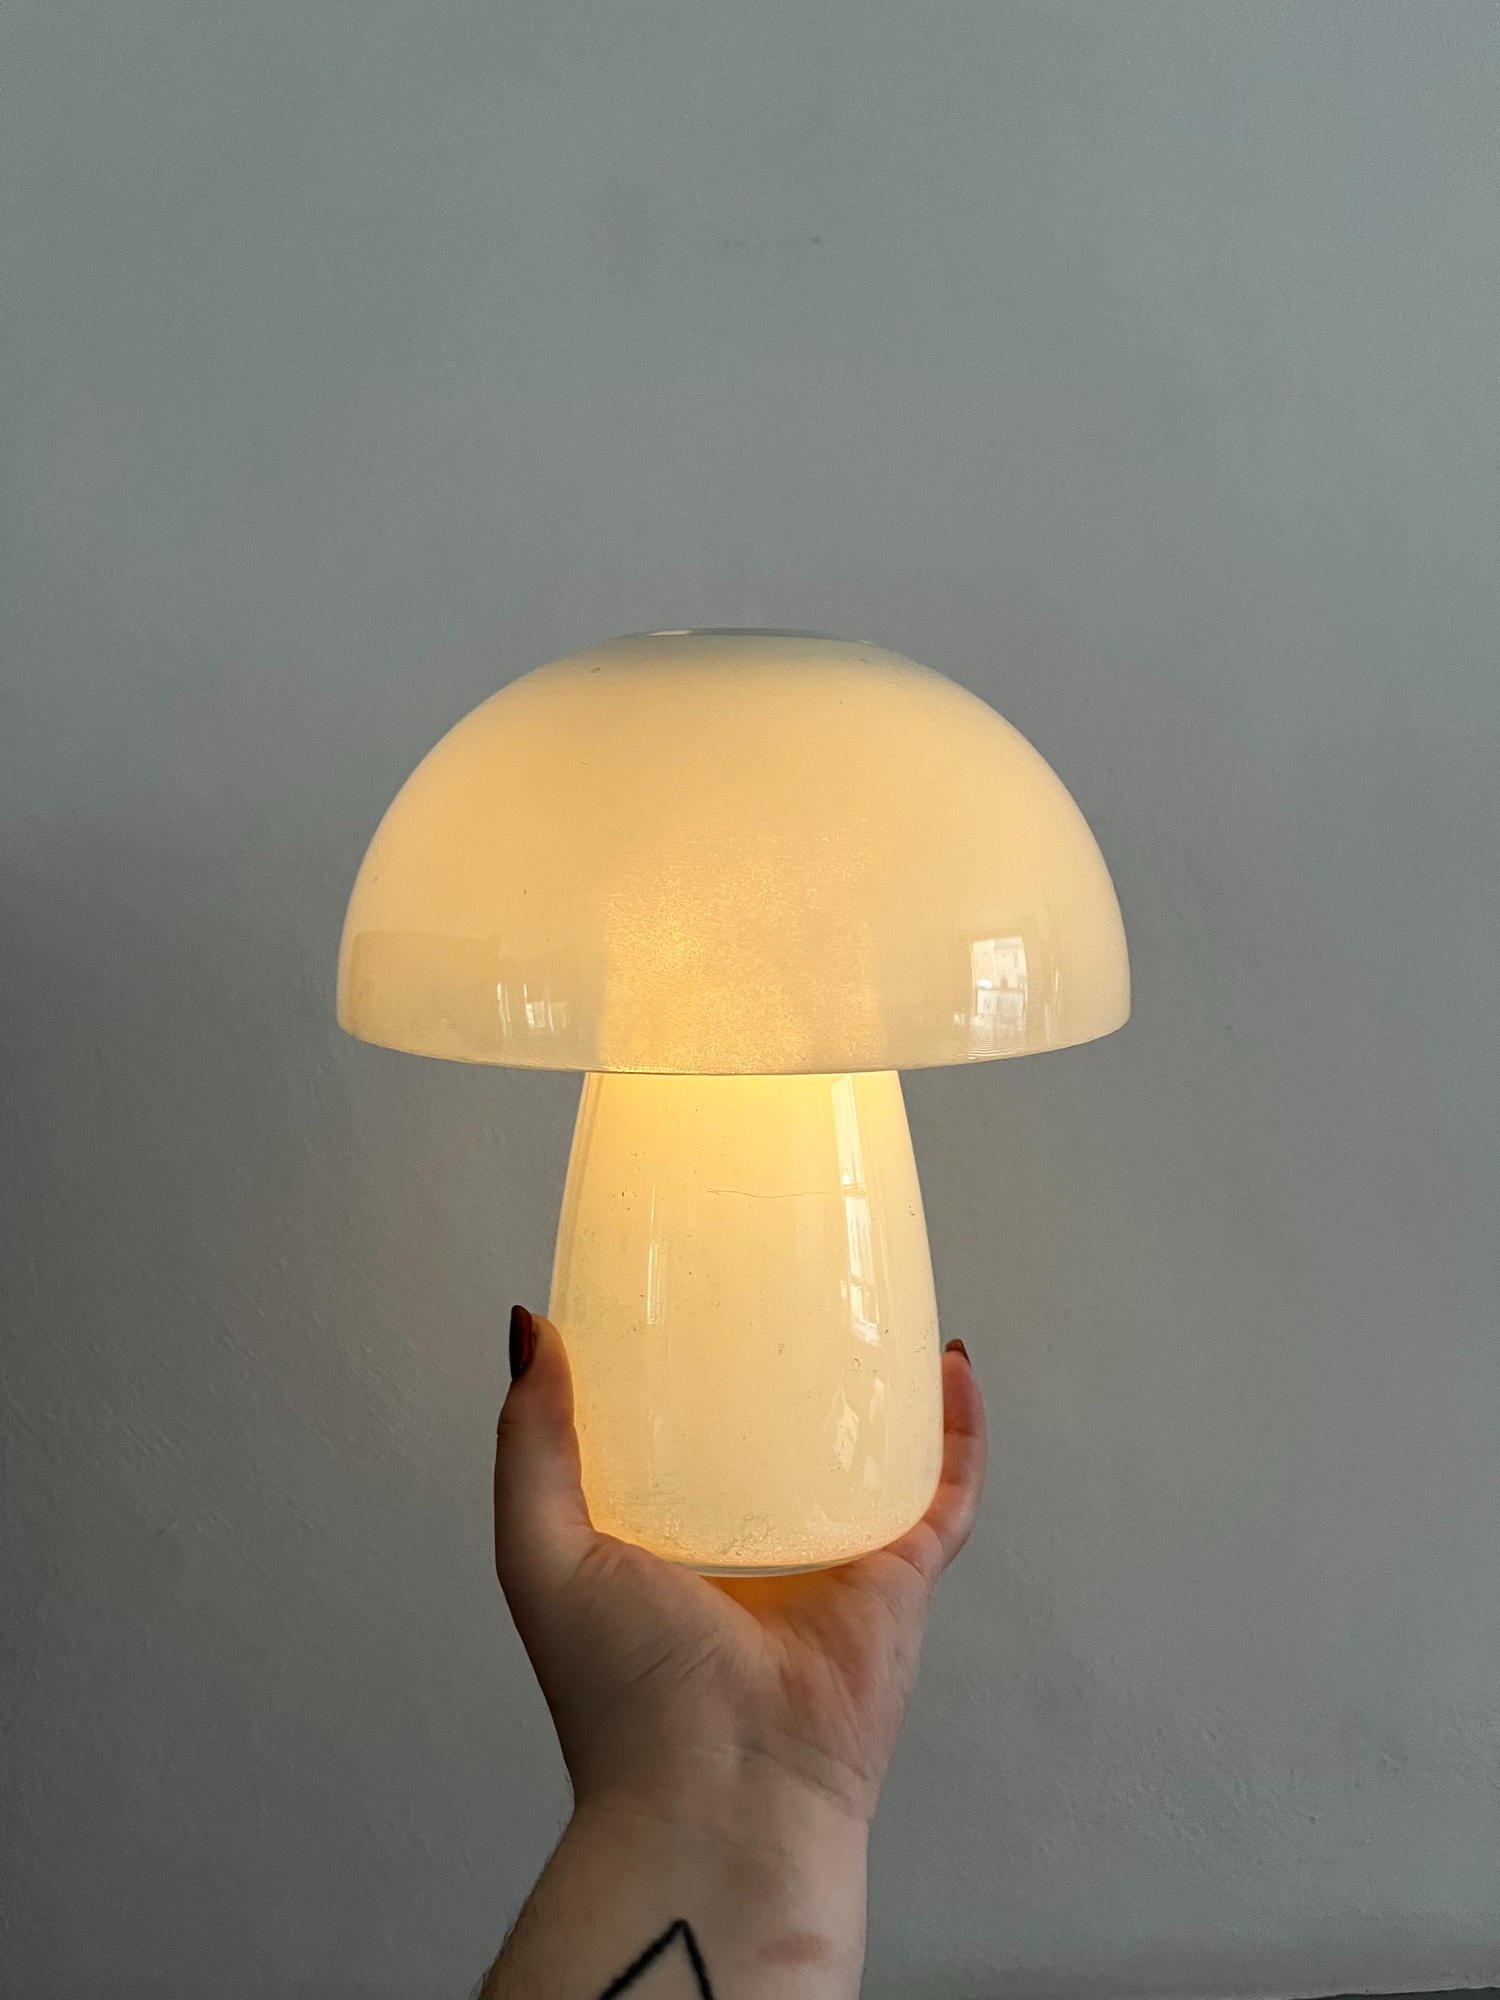 Décorate your home with cool lamp